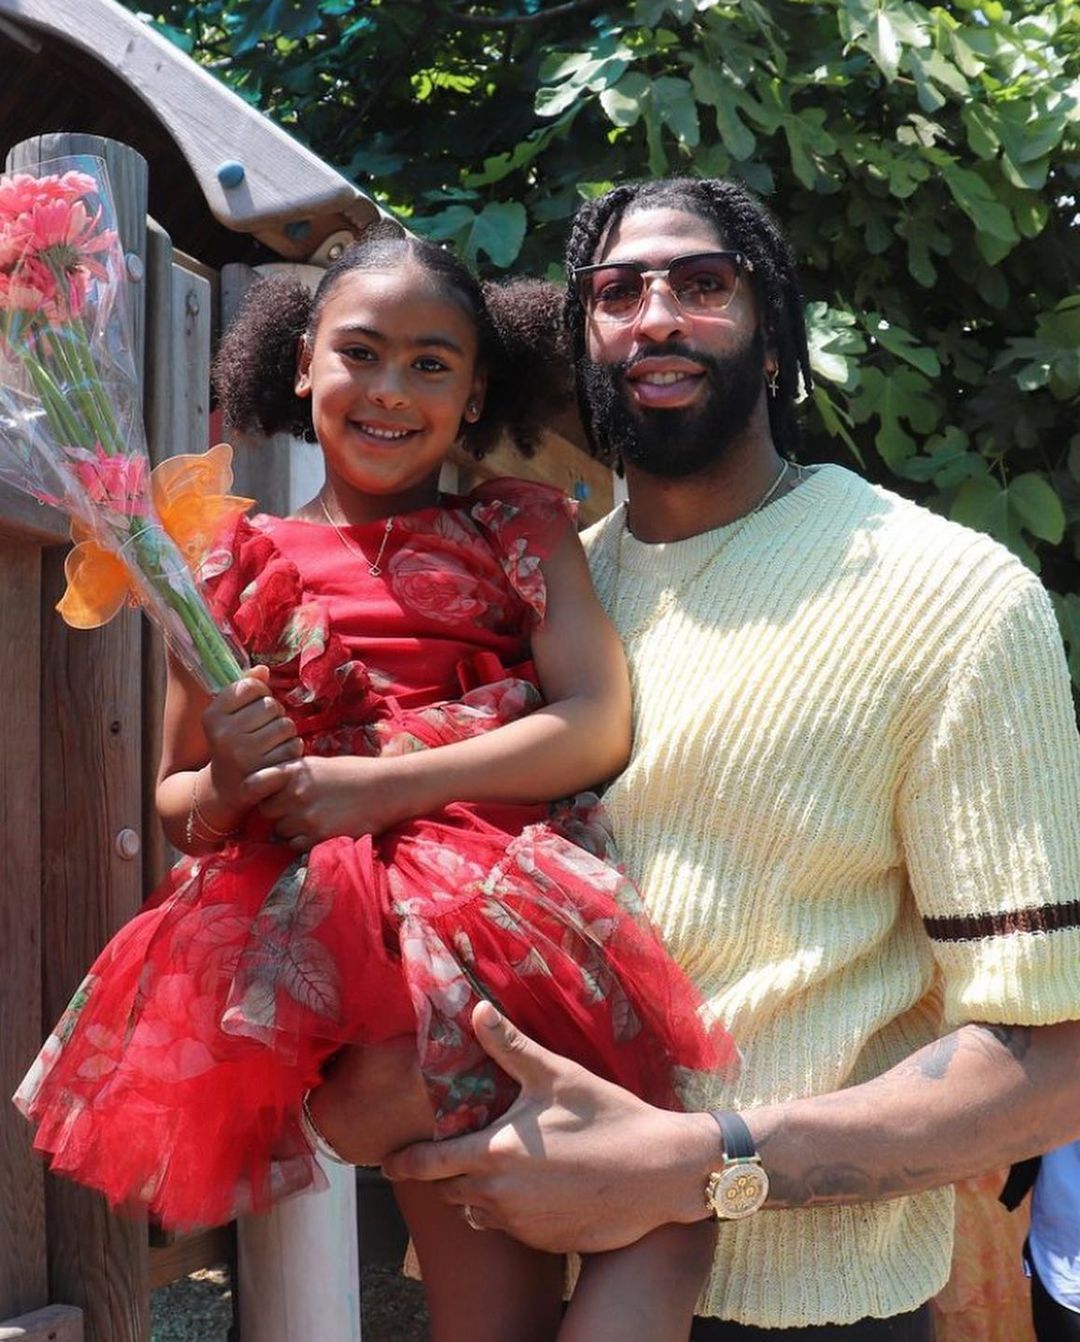 AD Shares the Joy of Fatherhood Through Sweet Memories with His Daughter